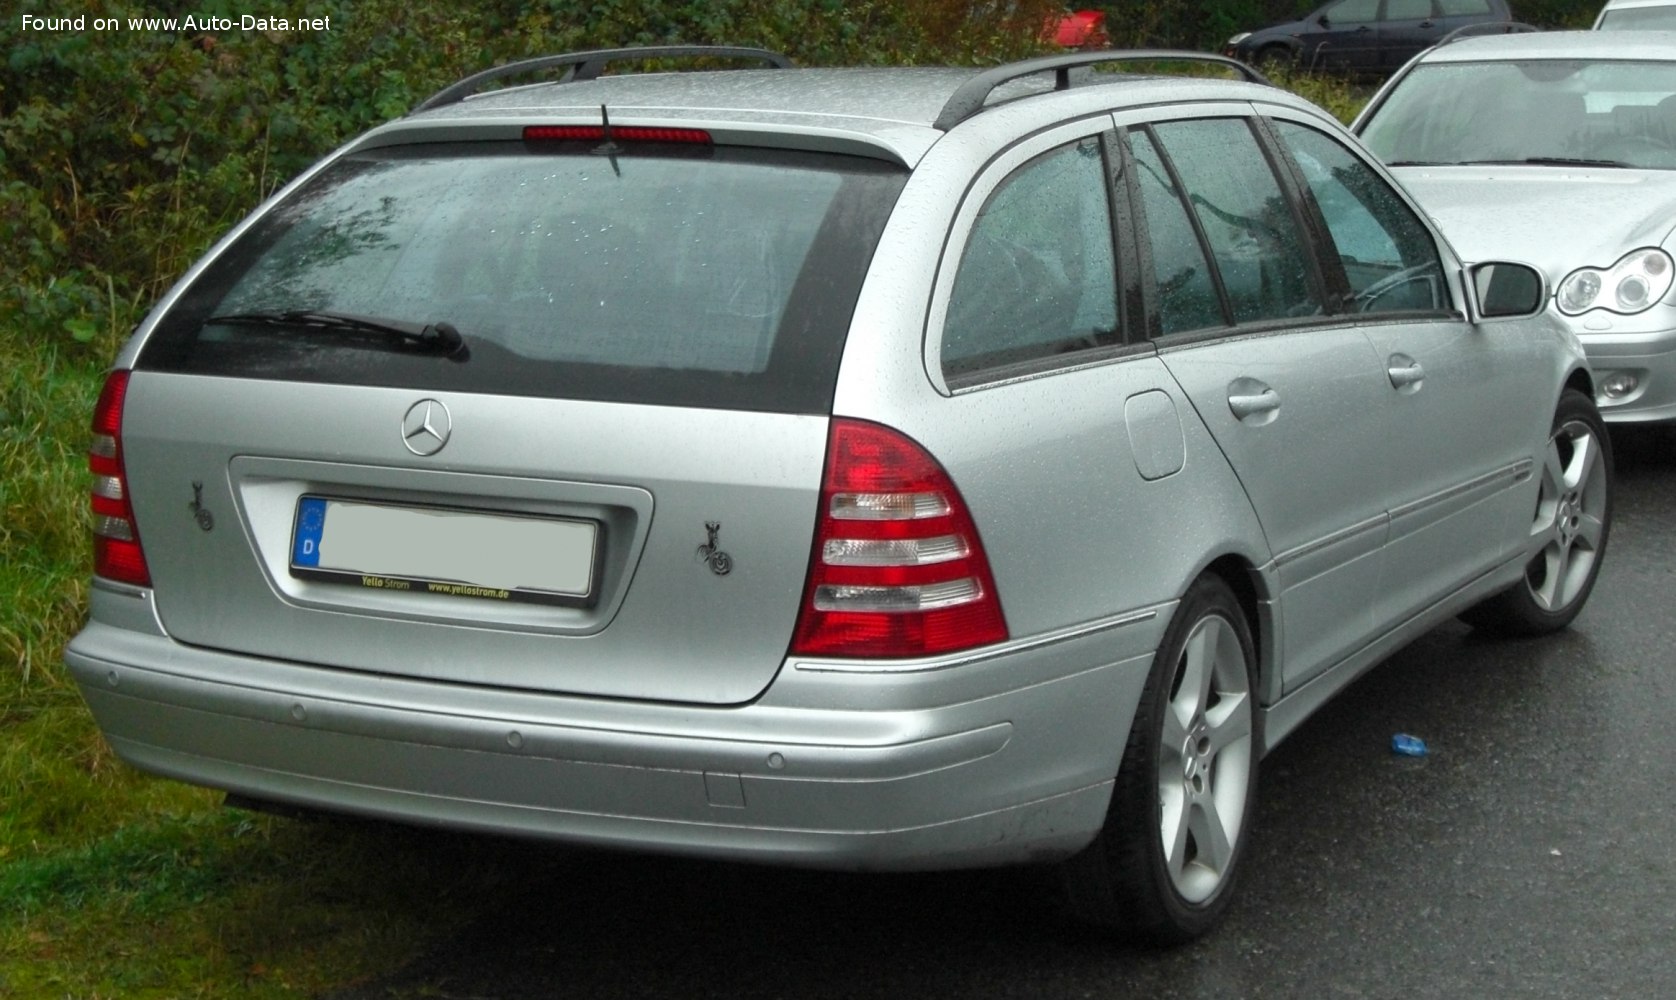 VIN Decoder and Lookup for MERCEDES-BENZ C-CLASS C